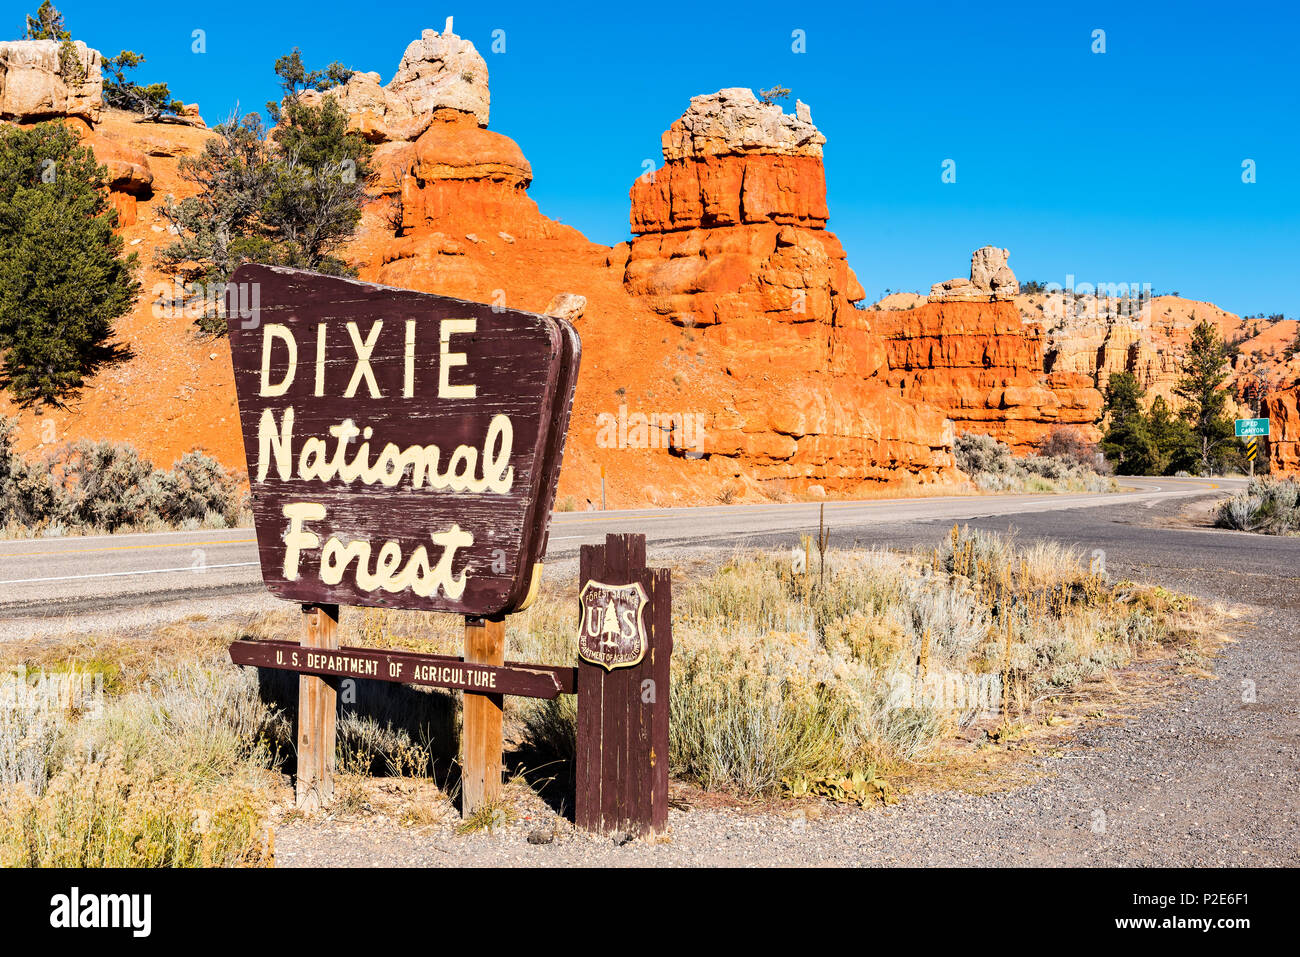 Red Canyon National Park, Dixie National Forest, Utah, USA Stock Photo